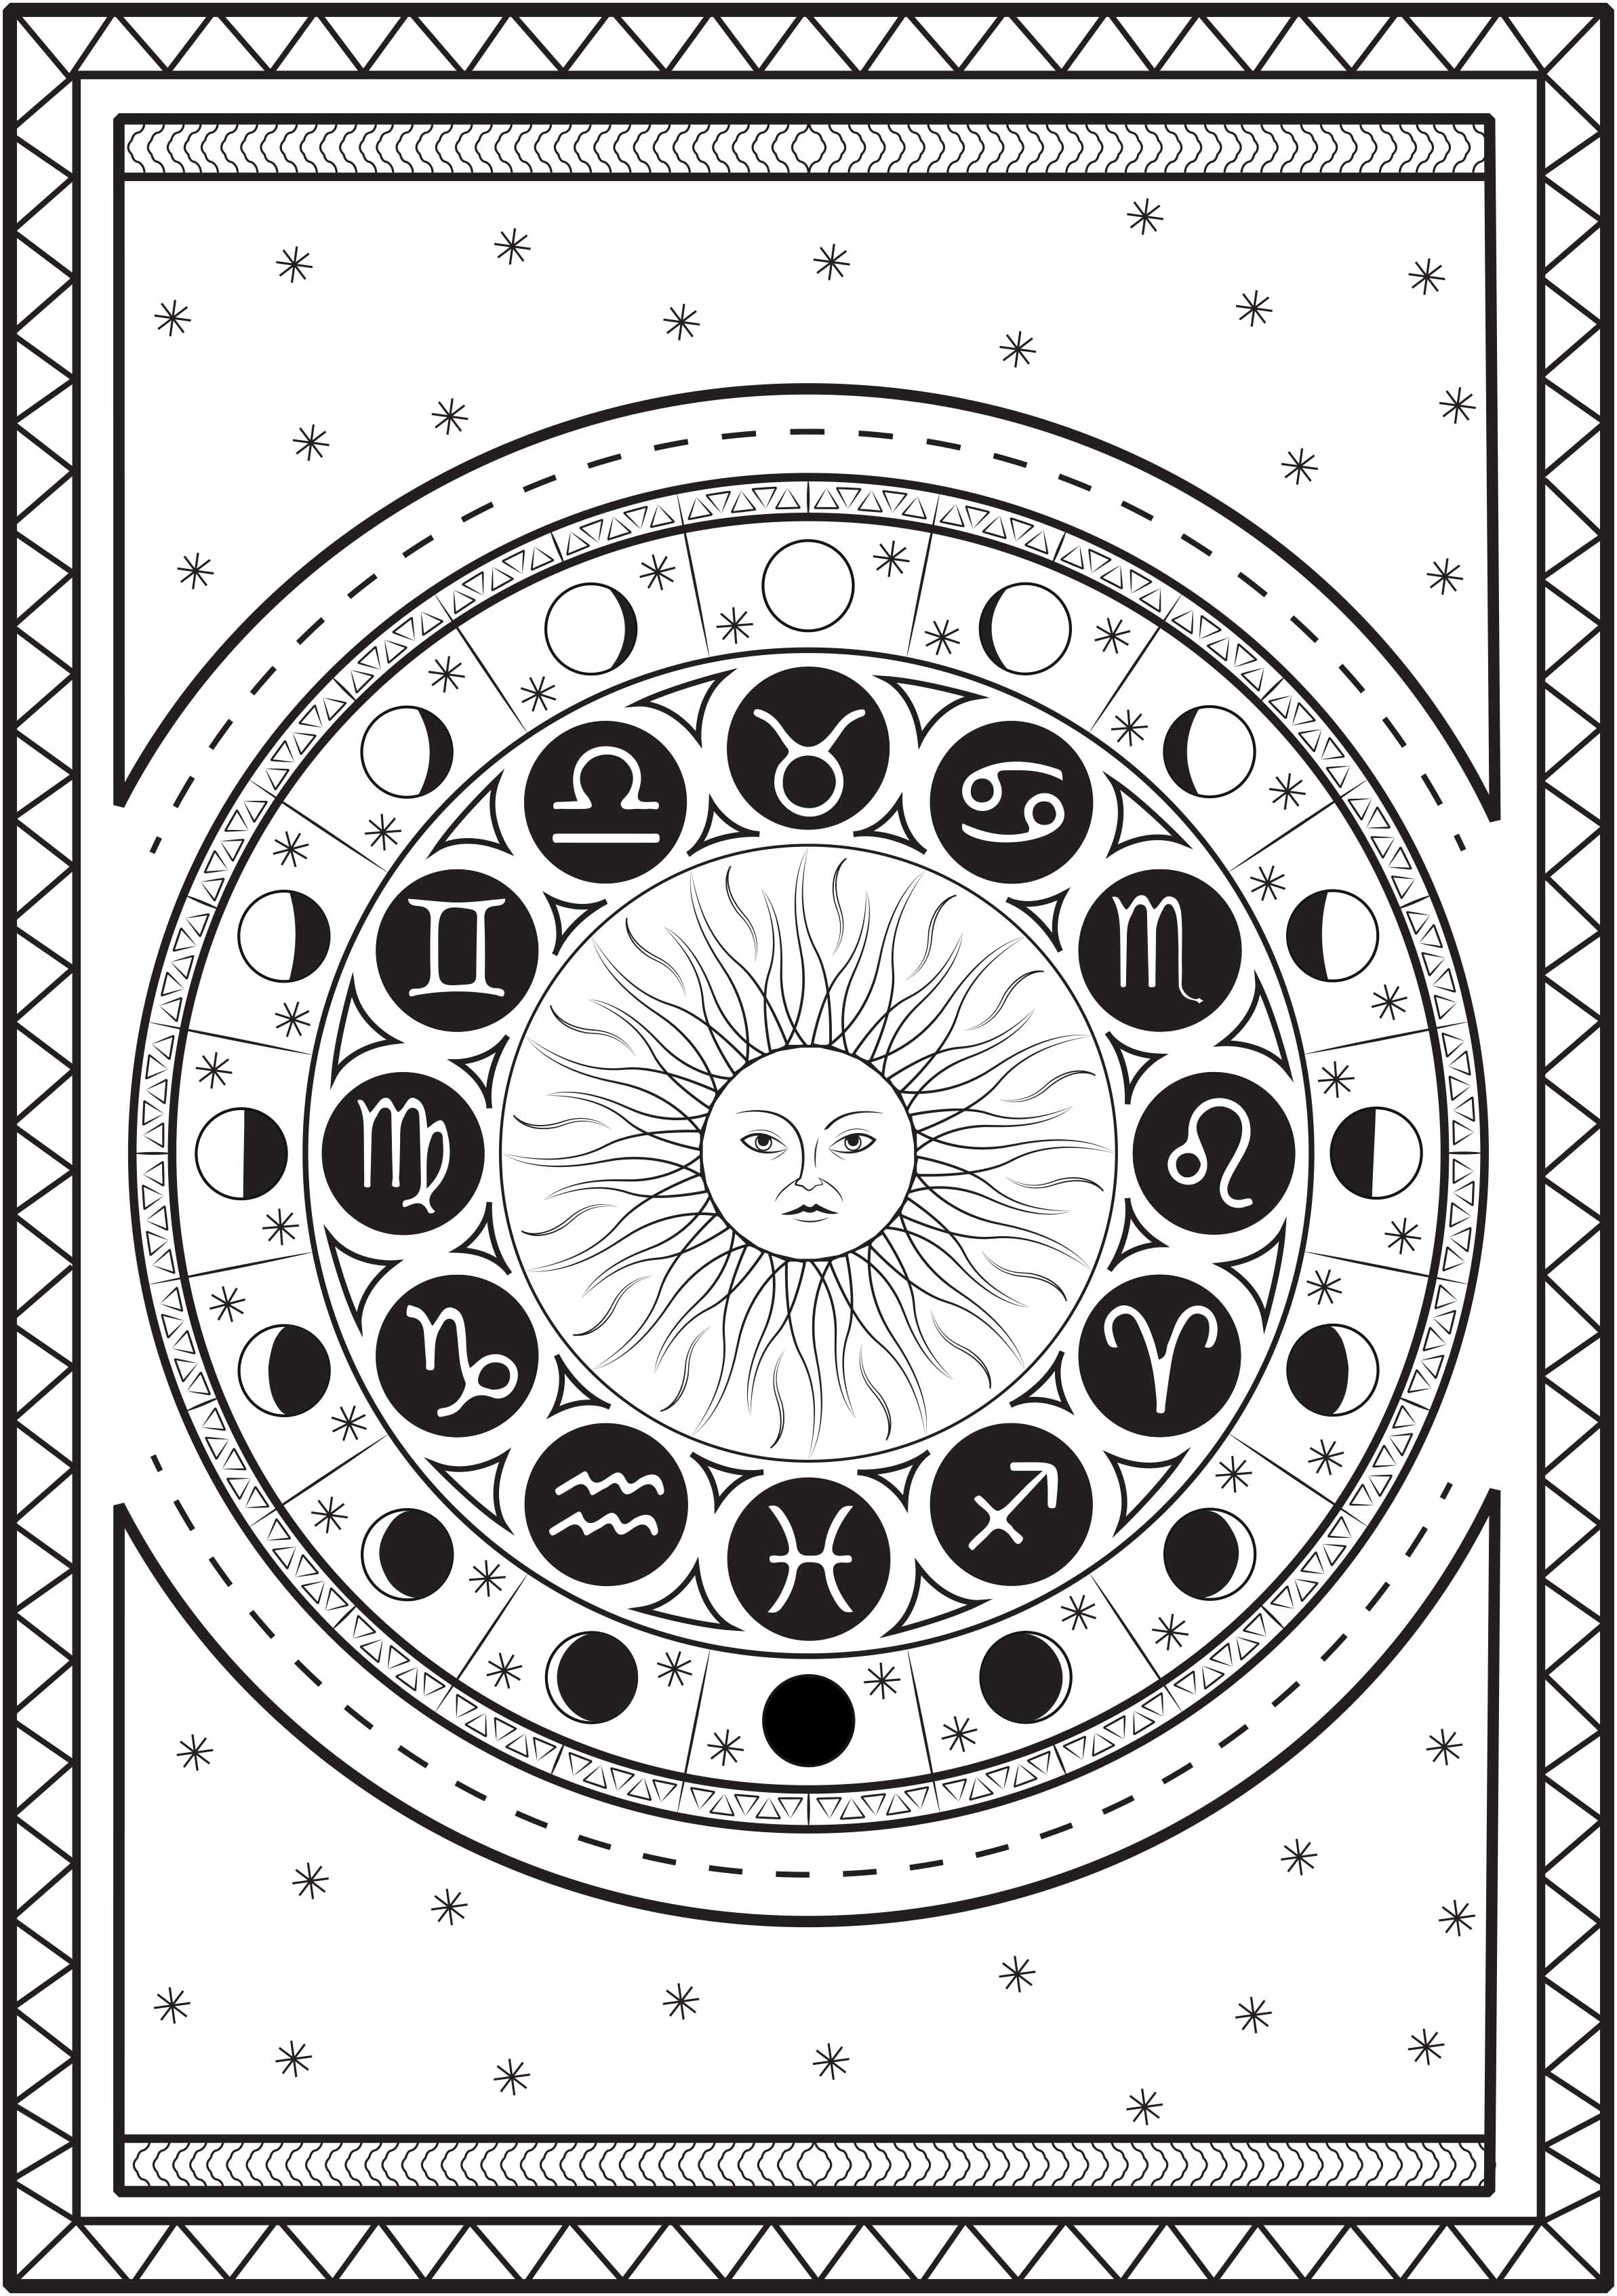 Mandala composed of astrological signs around a sun, with the moon cycle, on a starry background, Artist : Louise